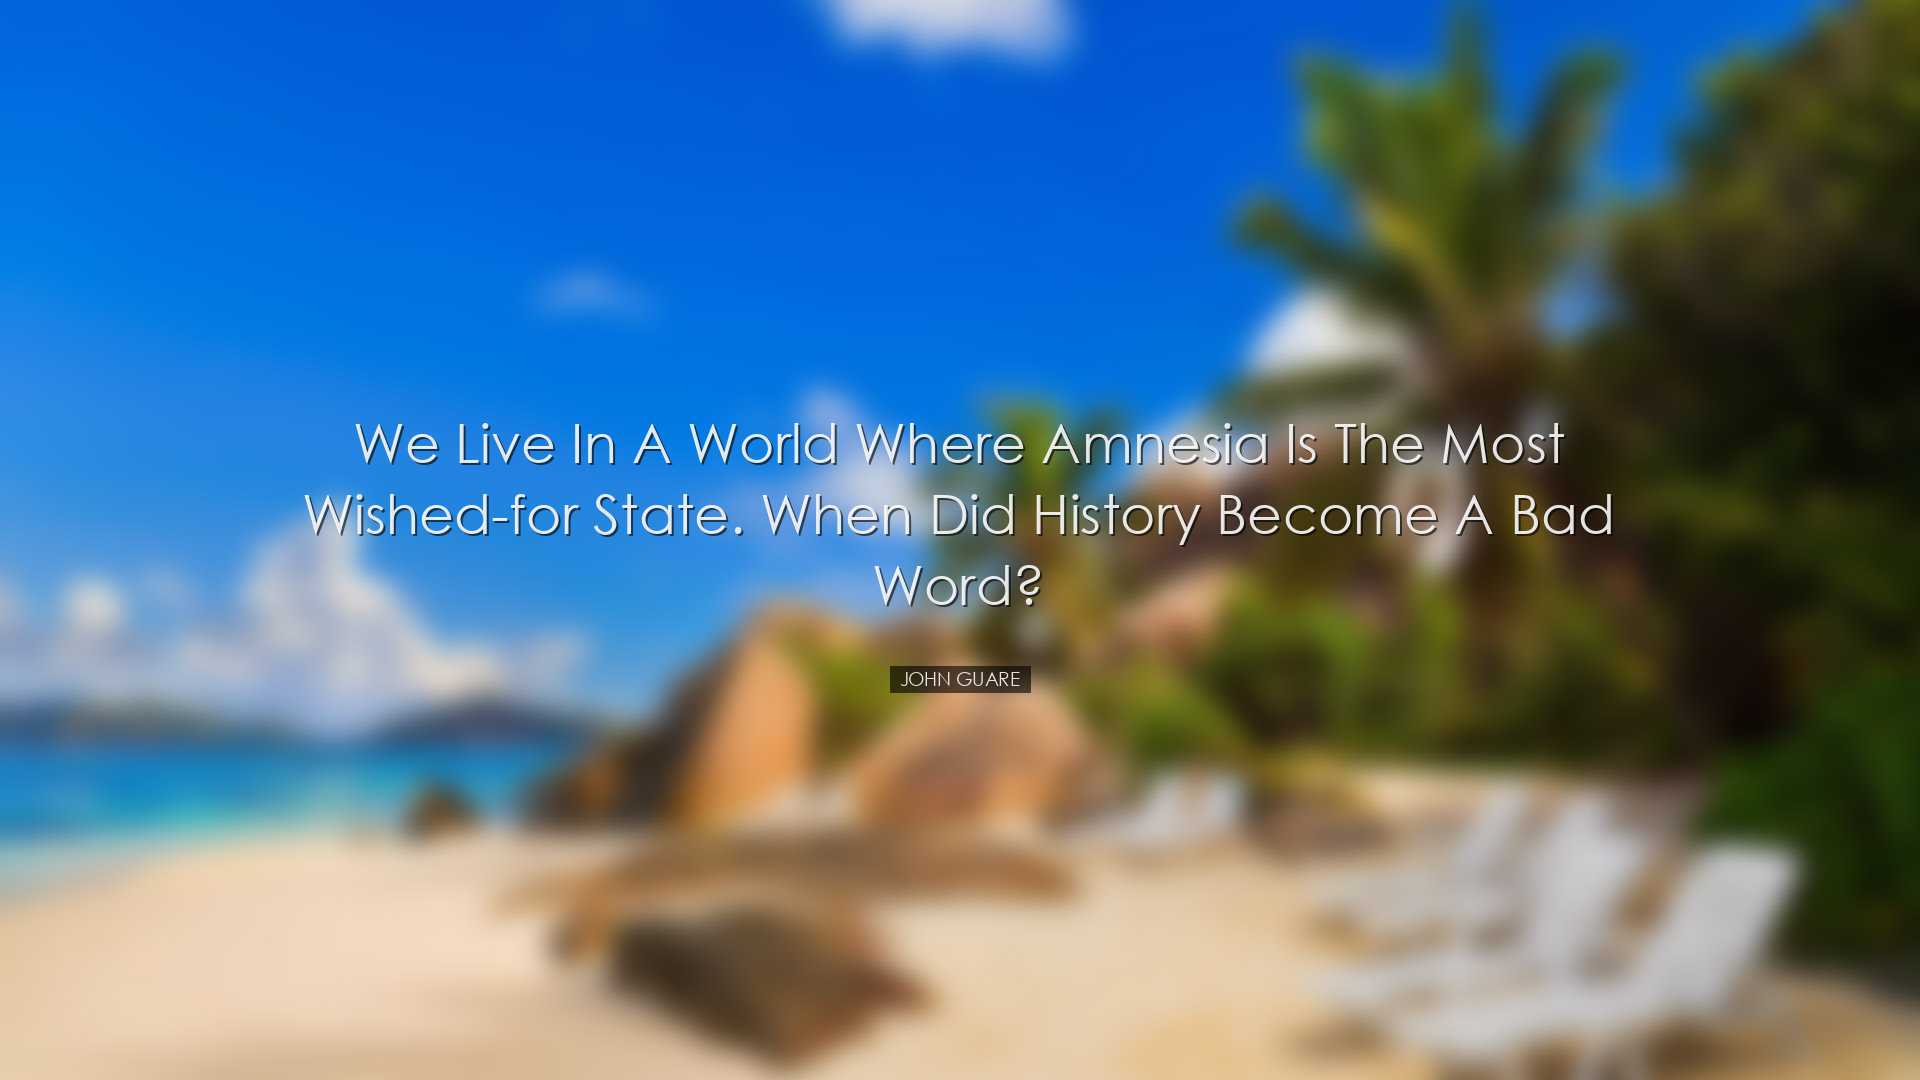 We live in a world where amnesia is the most wished-for state. Whe